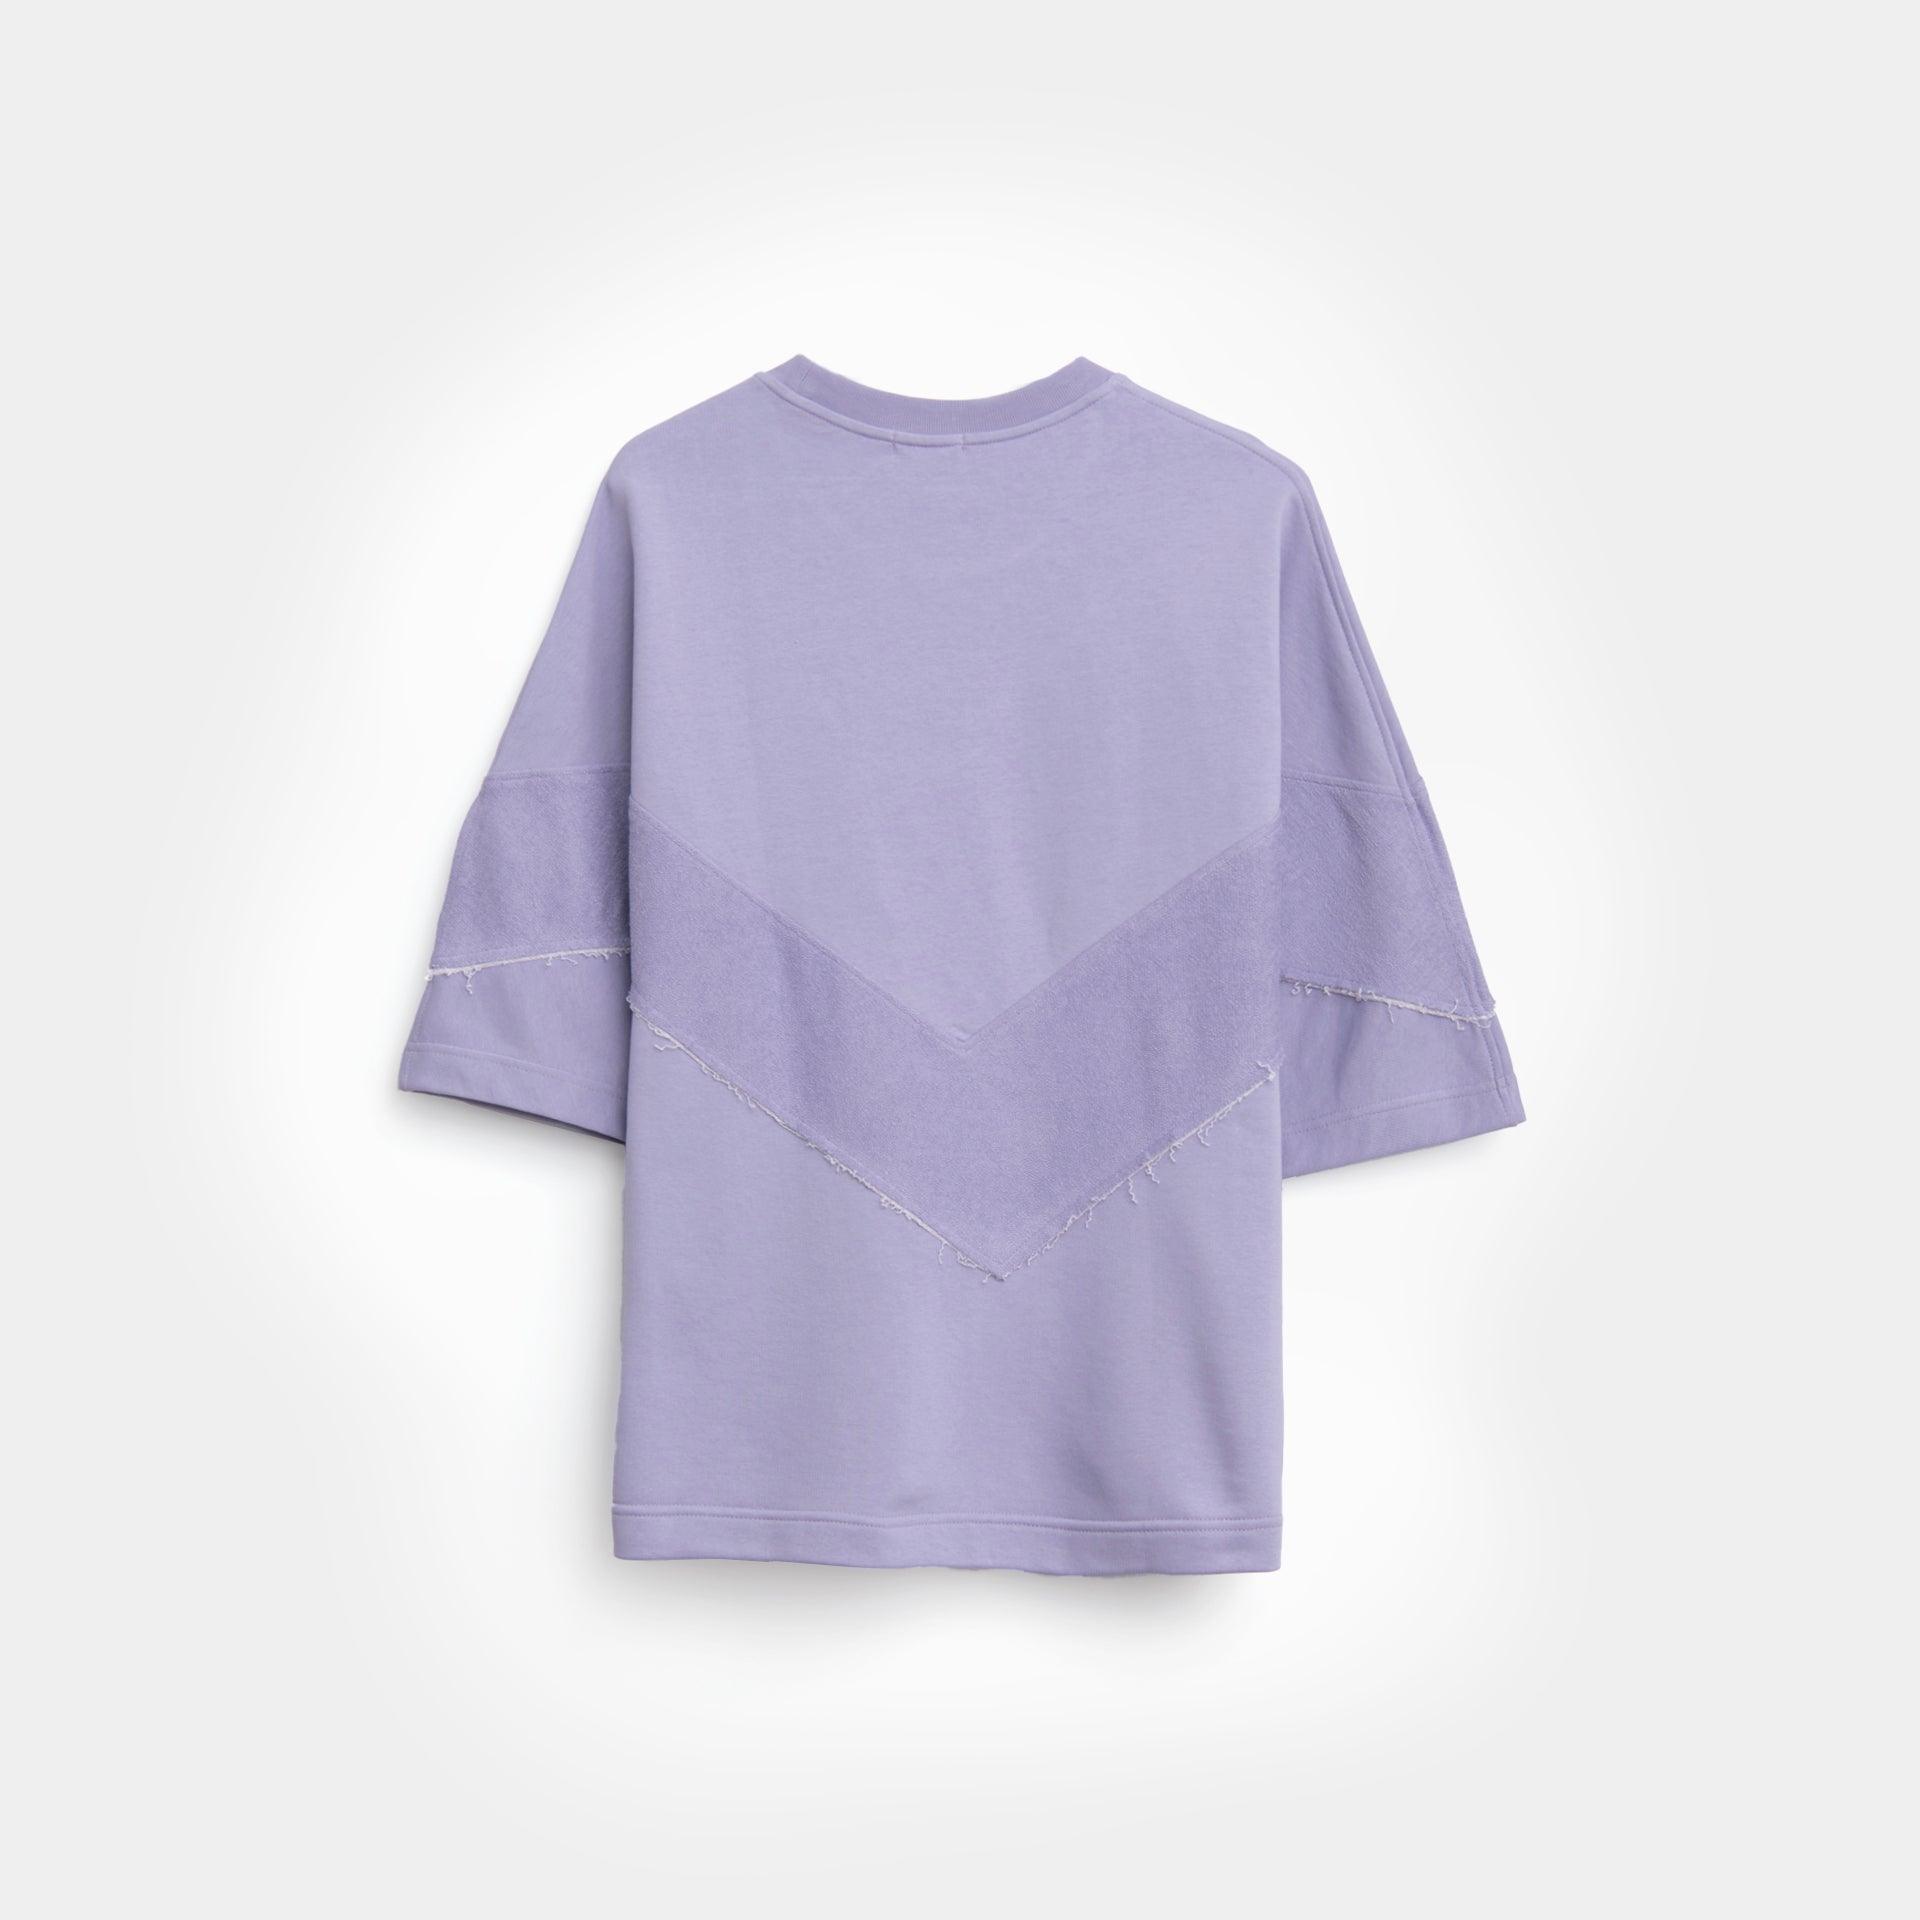 Dark Violet T-shirt From S32 - WECRE8